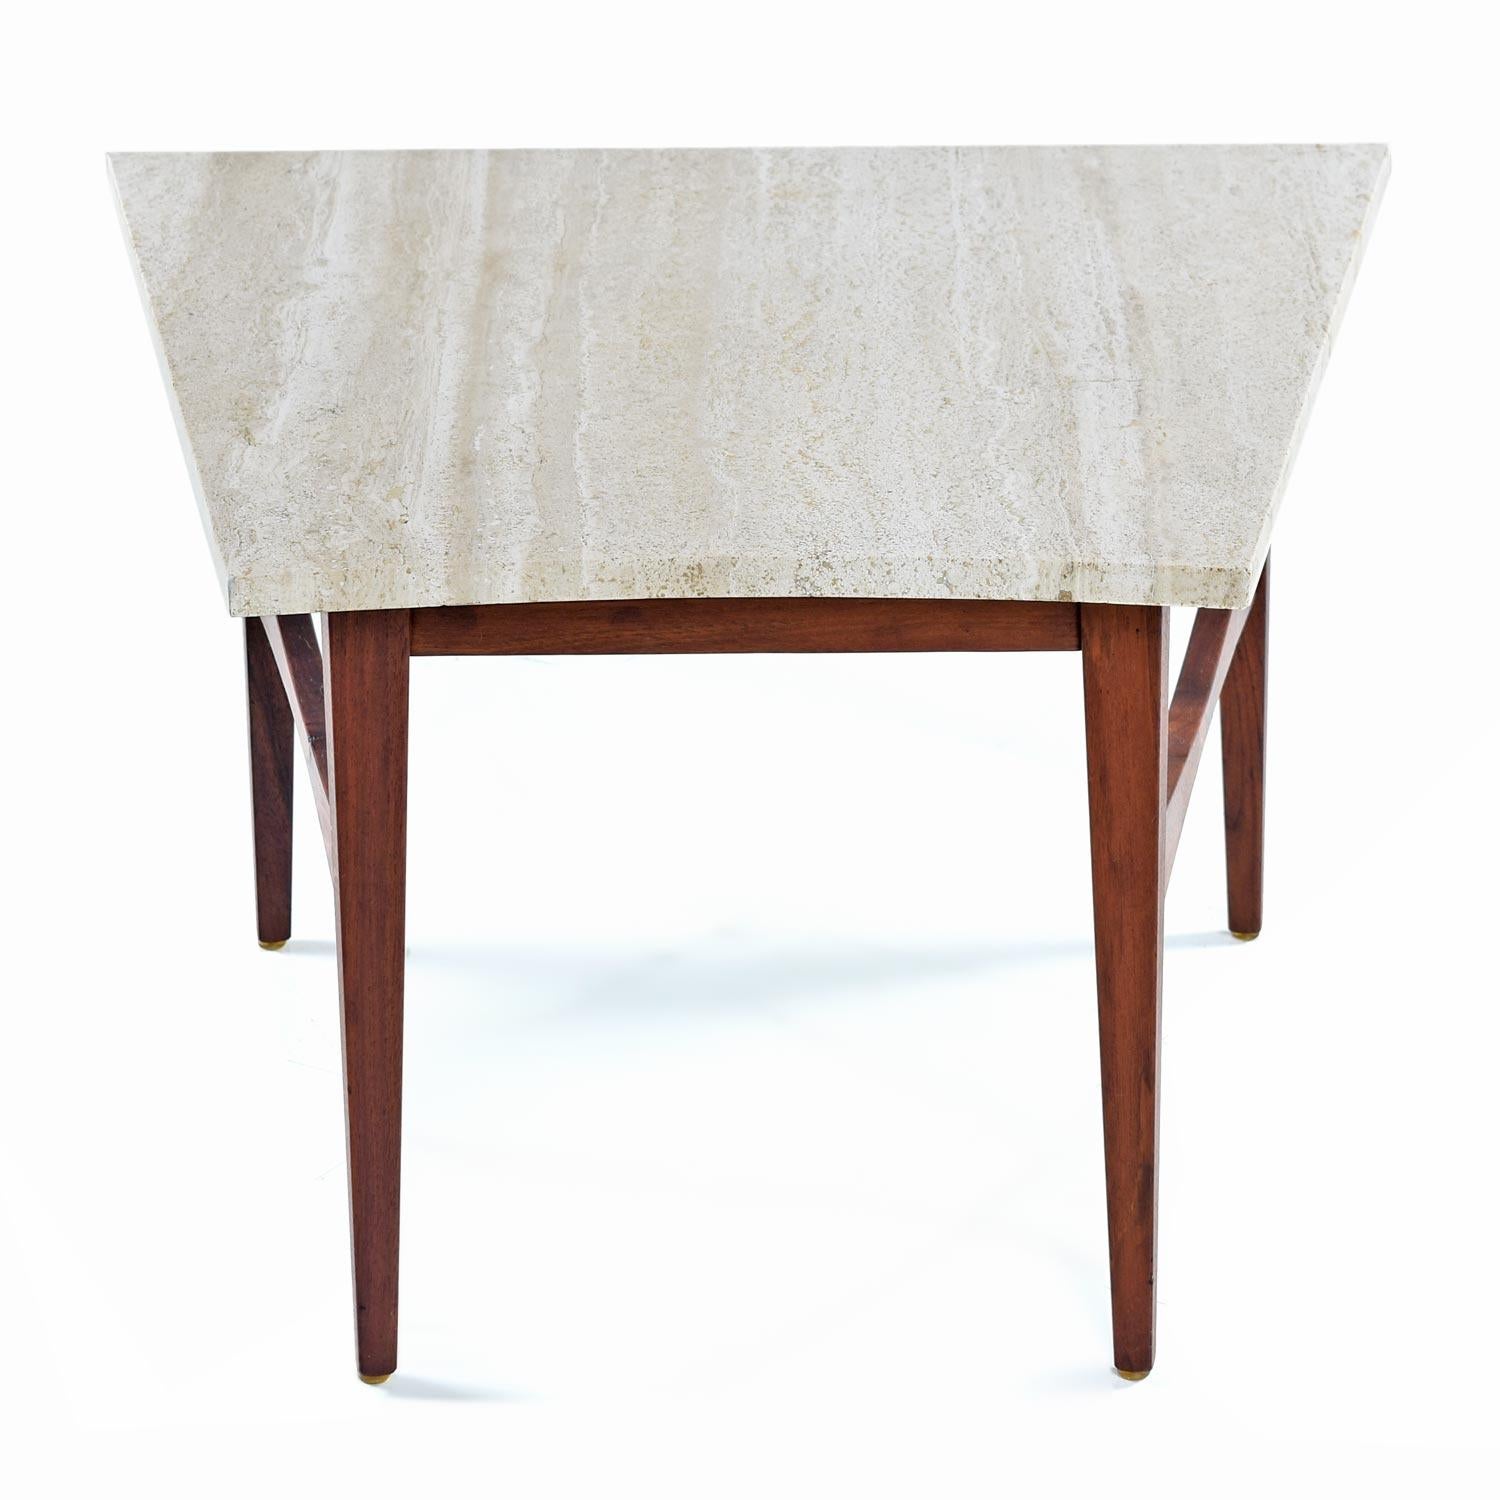 Unique wedge shaped Mid-Century Modern end table in the style of Jens Risom. Triangle shape Italian travertine (stone) top with solid walnut wood frame. Tapered Danish look to the spanners and legs. Note the gentle bow-tie contour to the